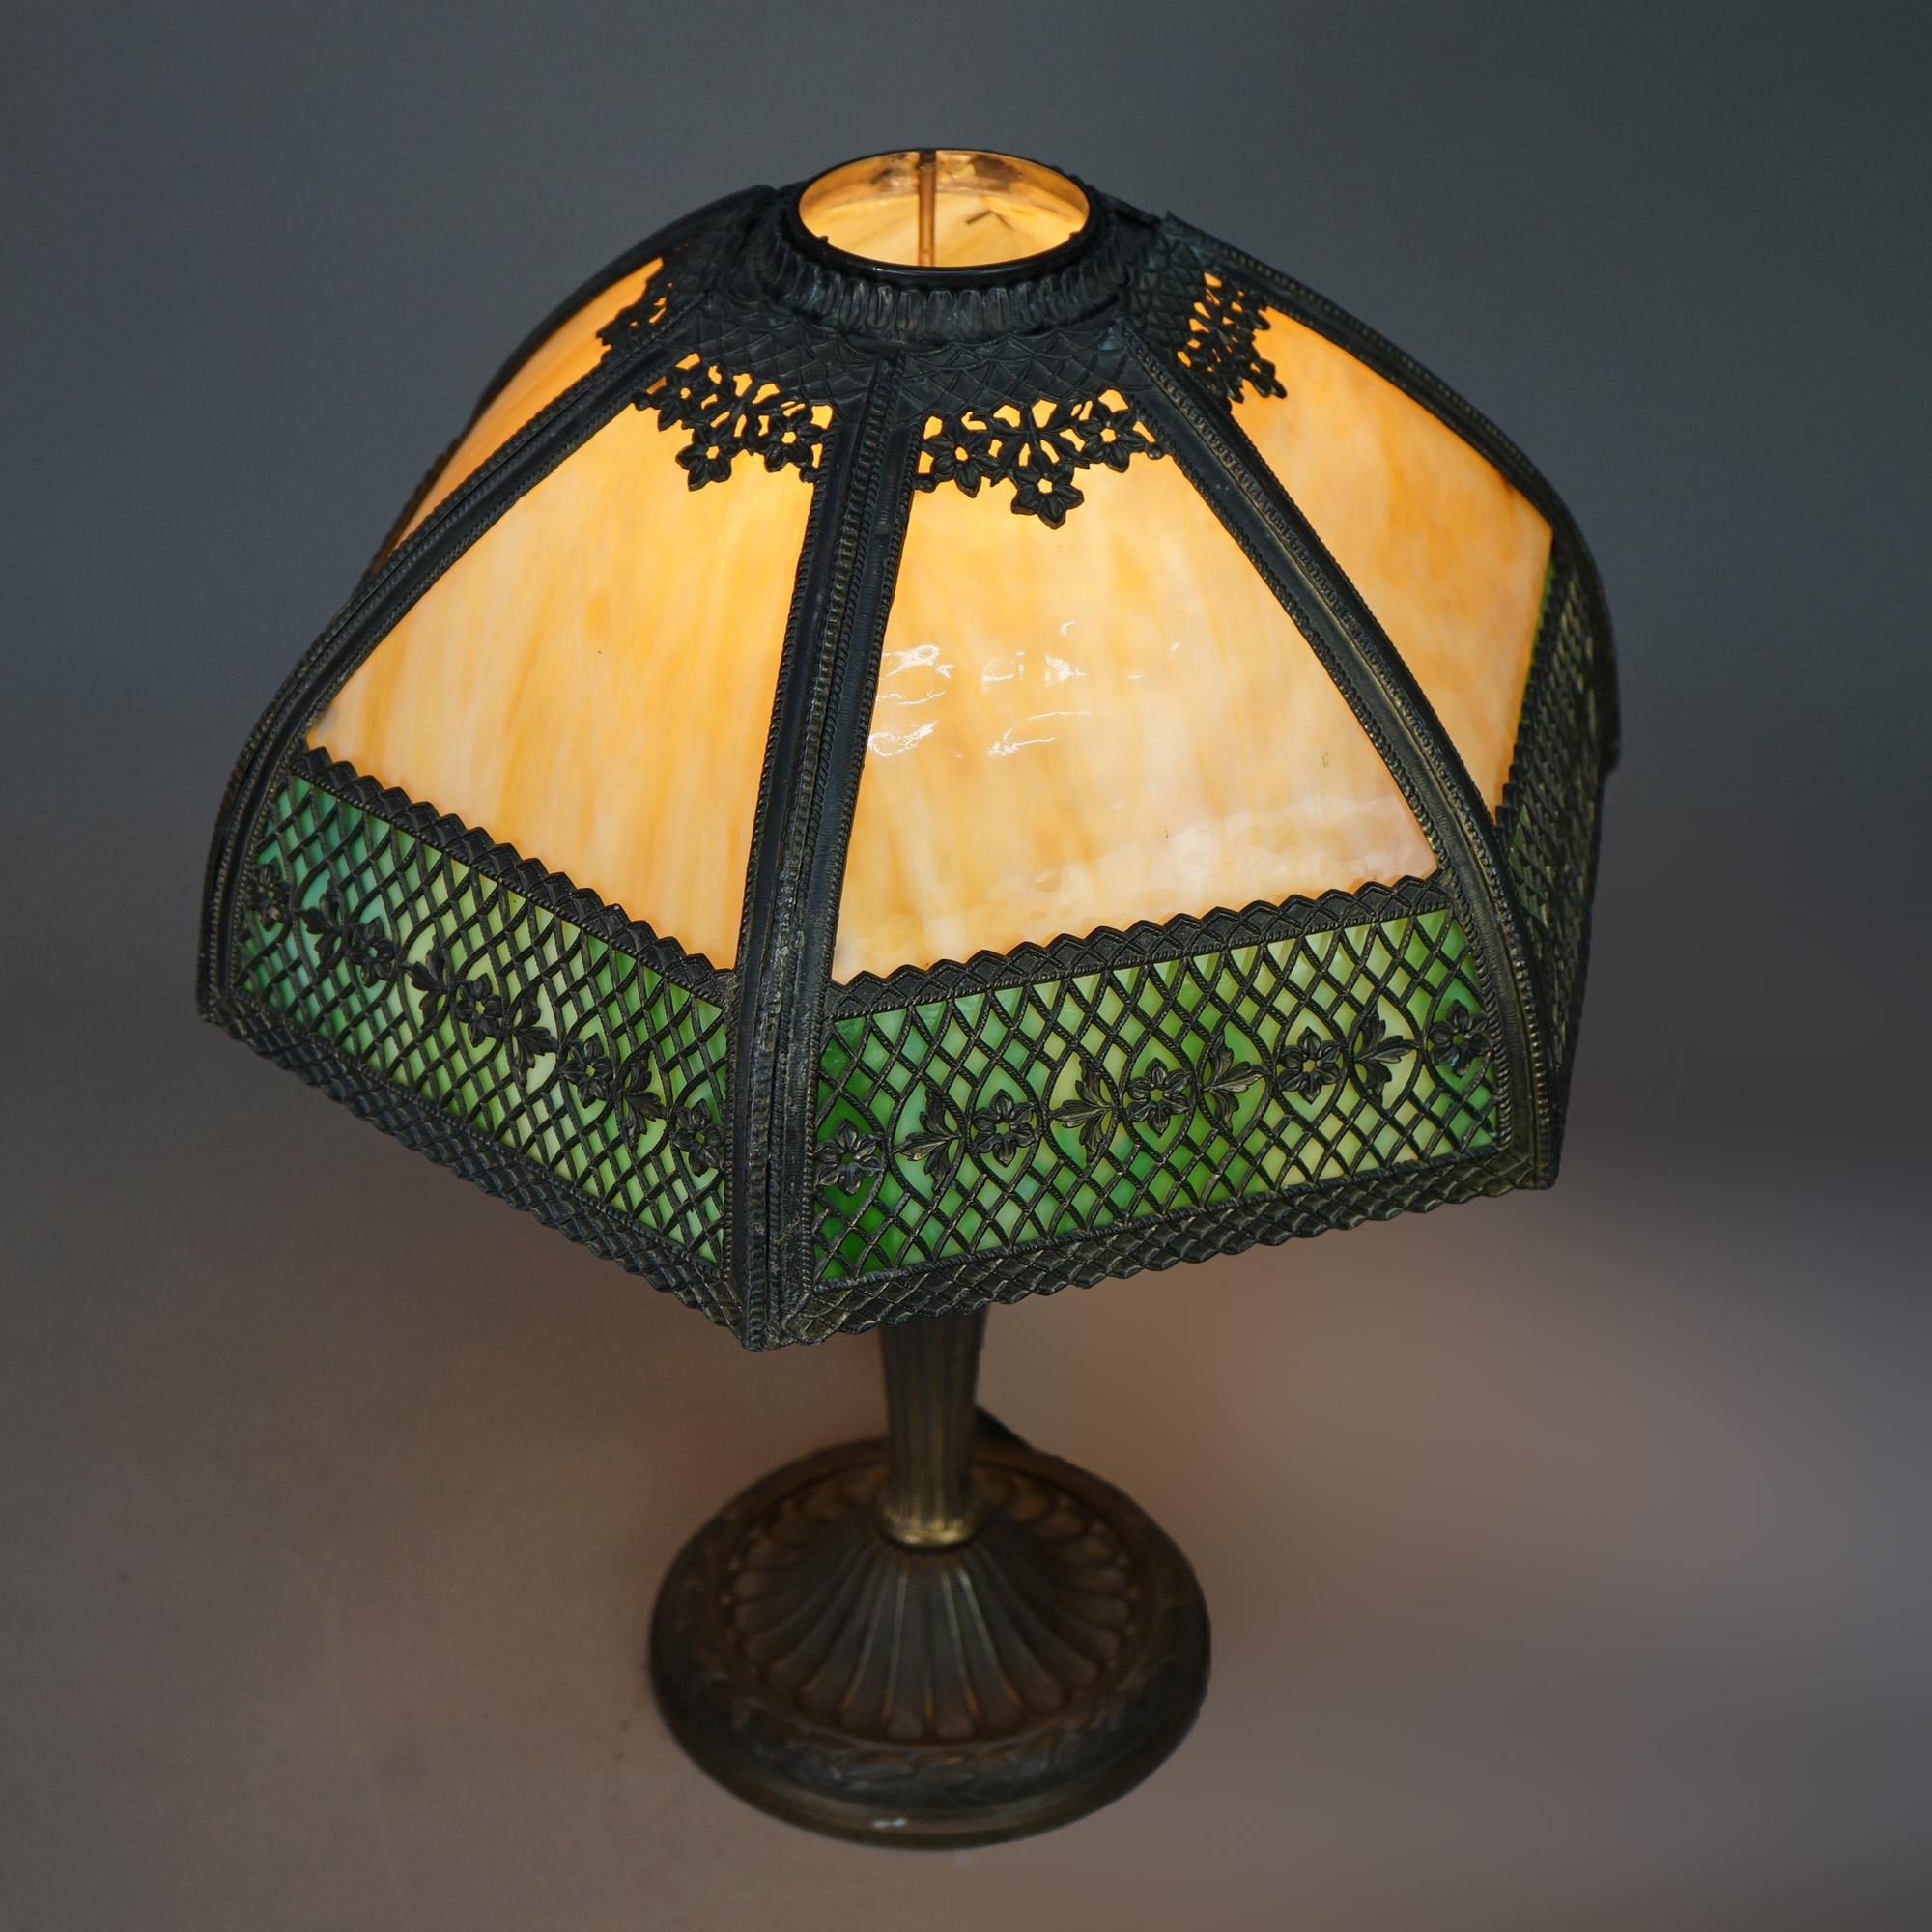 American Antique Arts & Crafts Two-Tone Slag Glass Lamp, circa 1910 For Sale